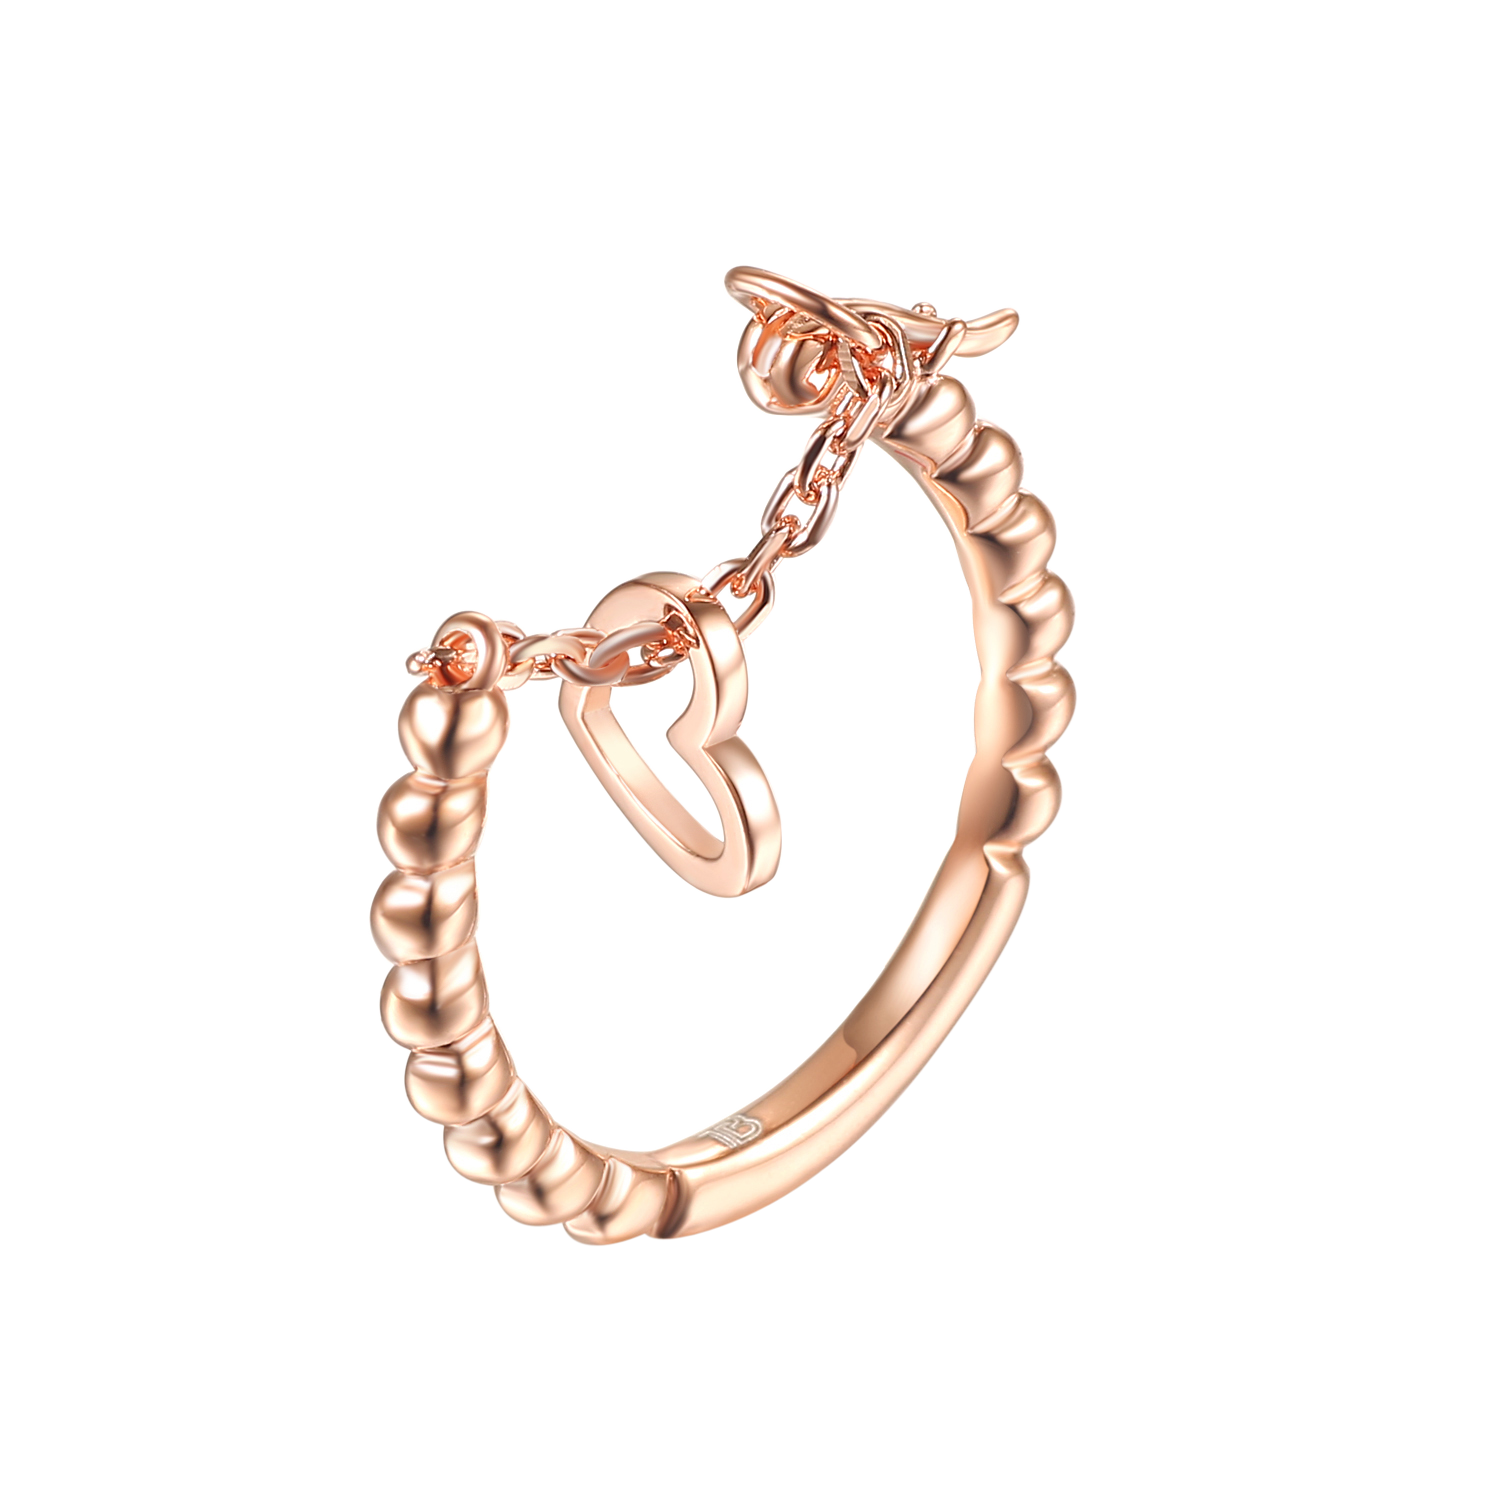 Joacii 925 Sterling Silver 18K Rose Gold Heart Short Chain Ling Ring With Bague